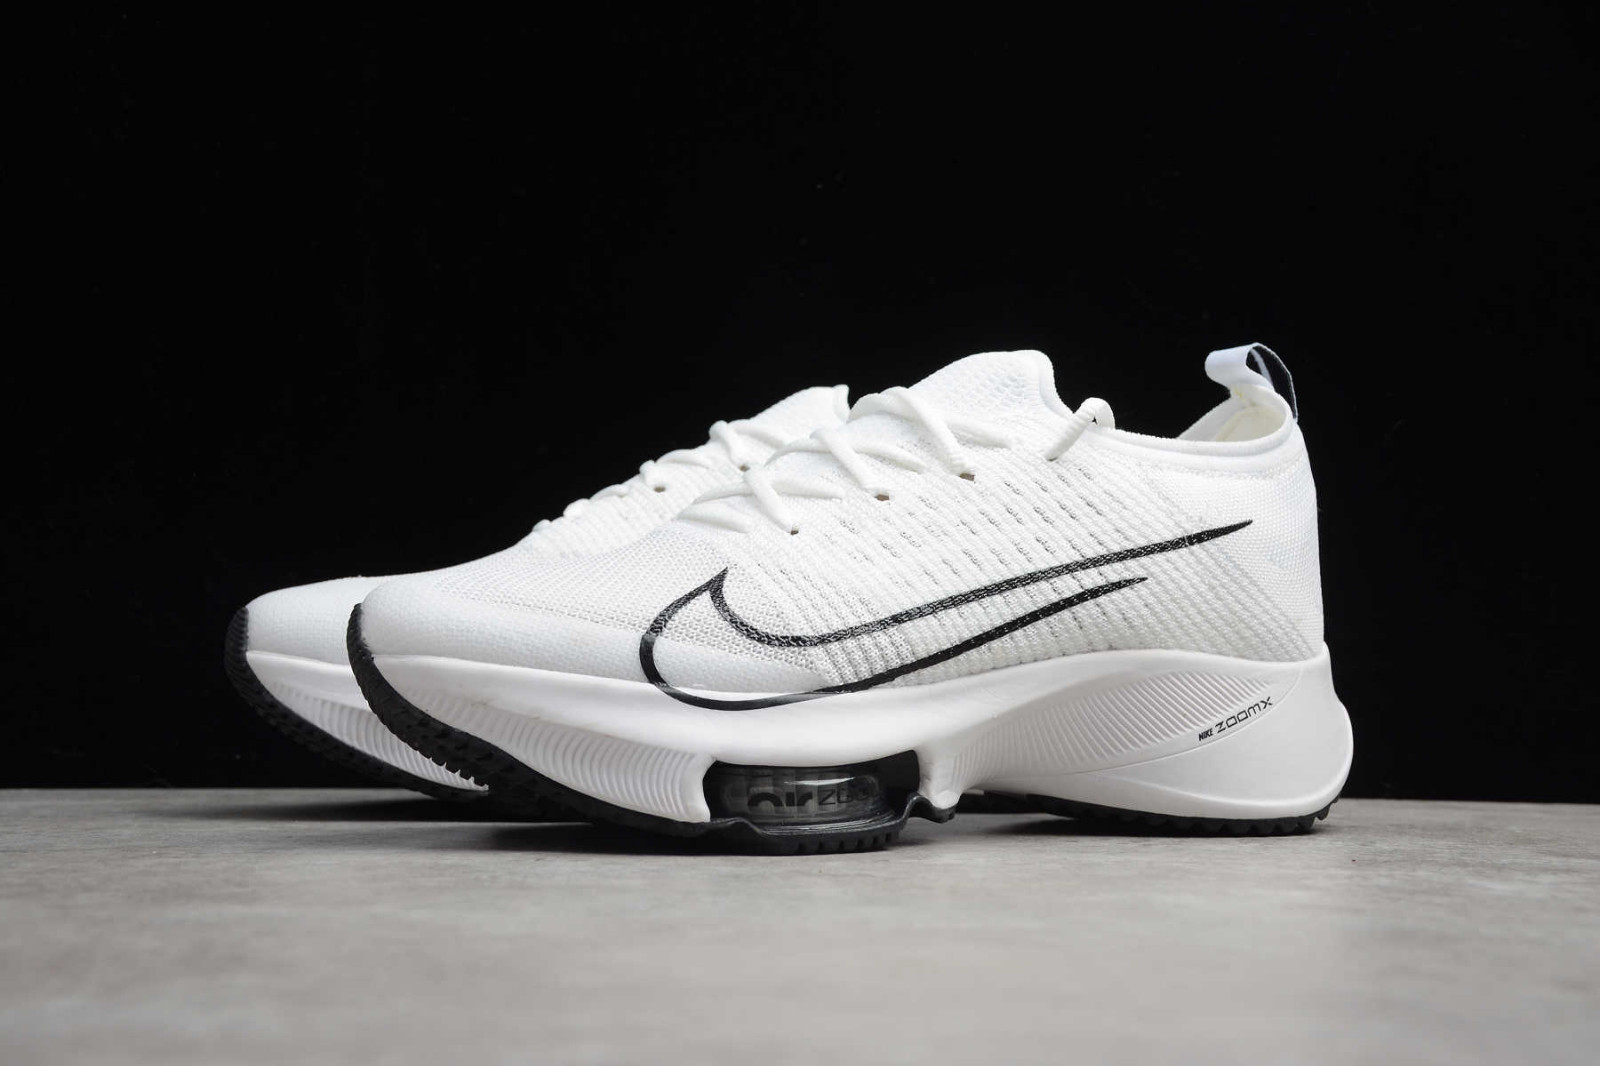 Nike Air Zoom Tempo NEXT% White Black Running BAMA CI9923 - GmarShops - New Nike Air Force 1 Low White Grey Sneakers DD7113-100 - 004